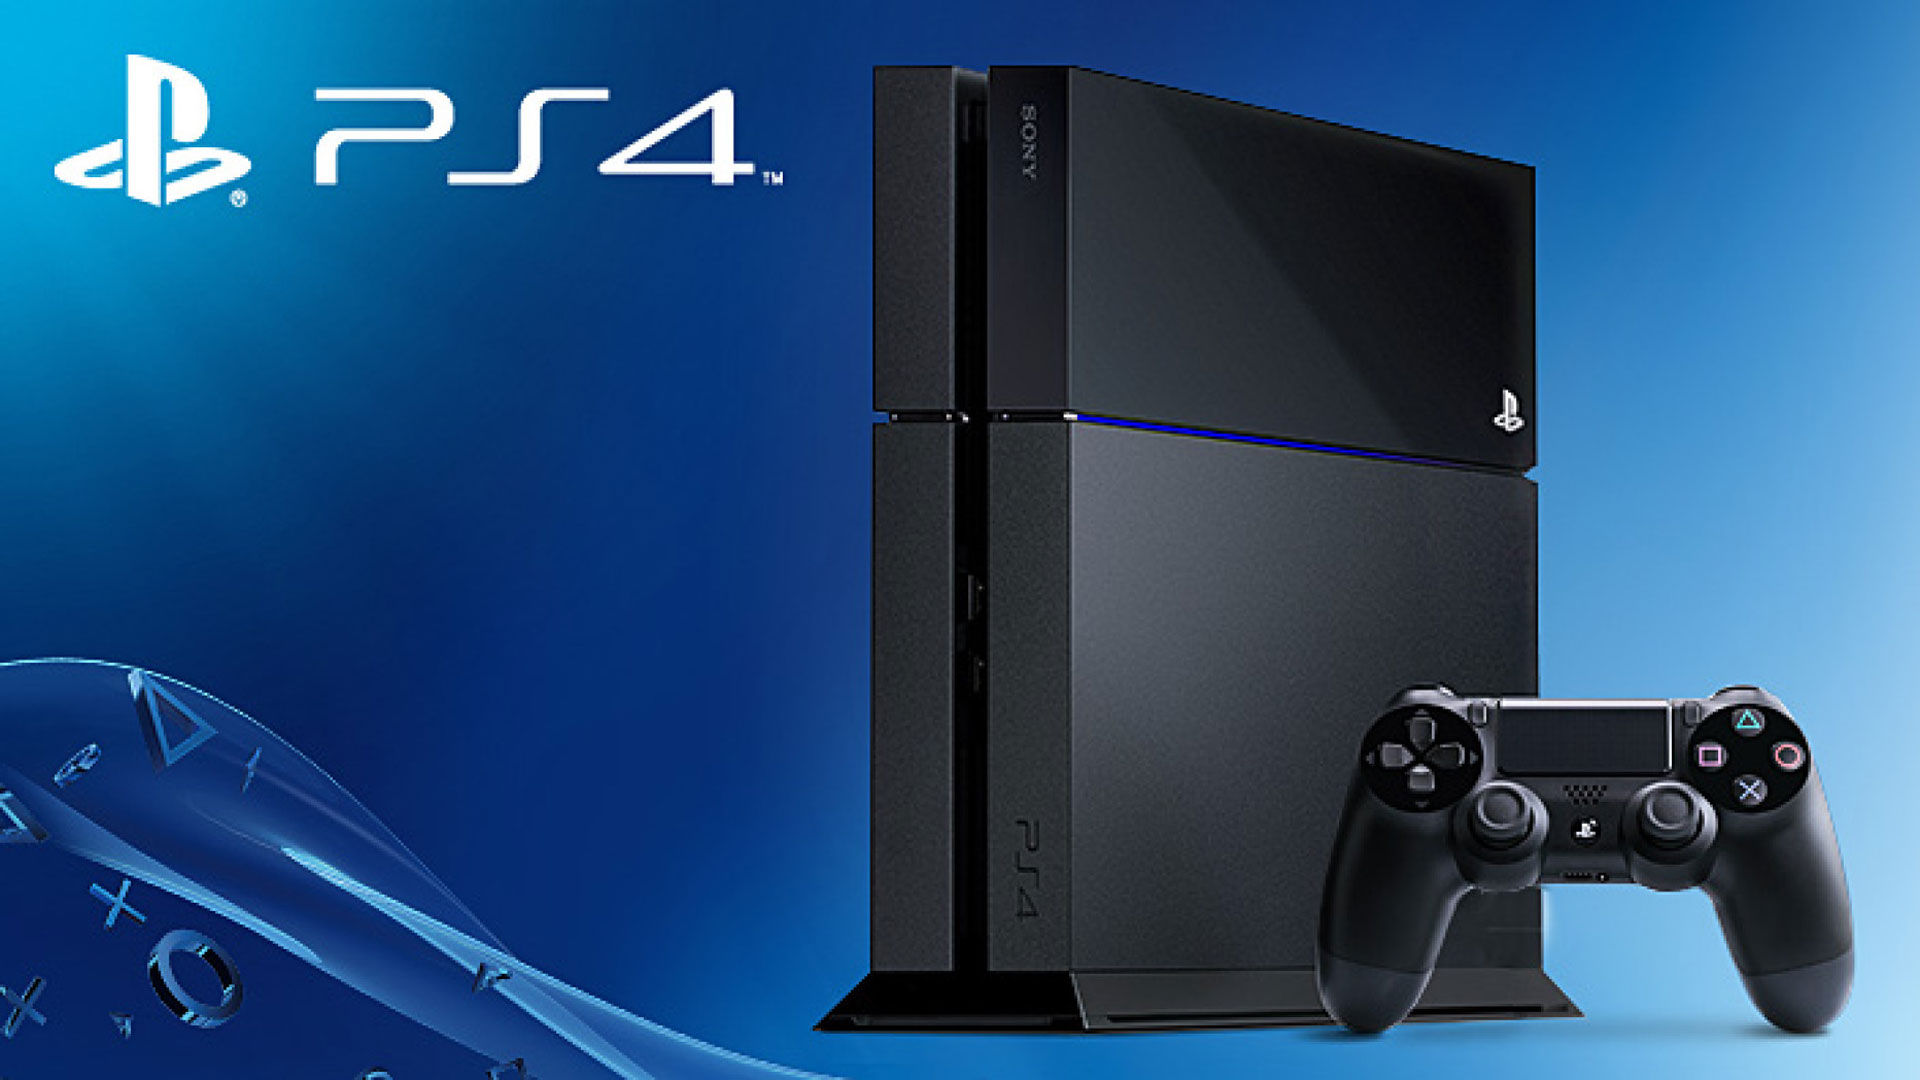 Sony working on PS4.5 with an upgraded GPU and 4K support - rumor